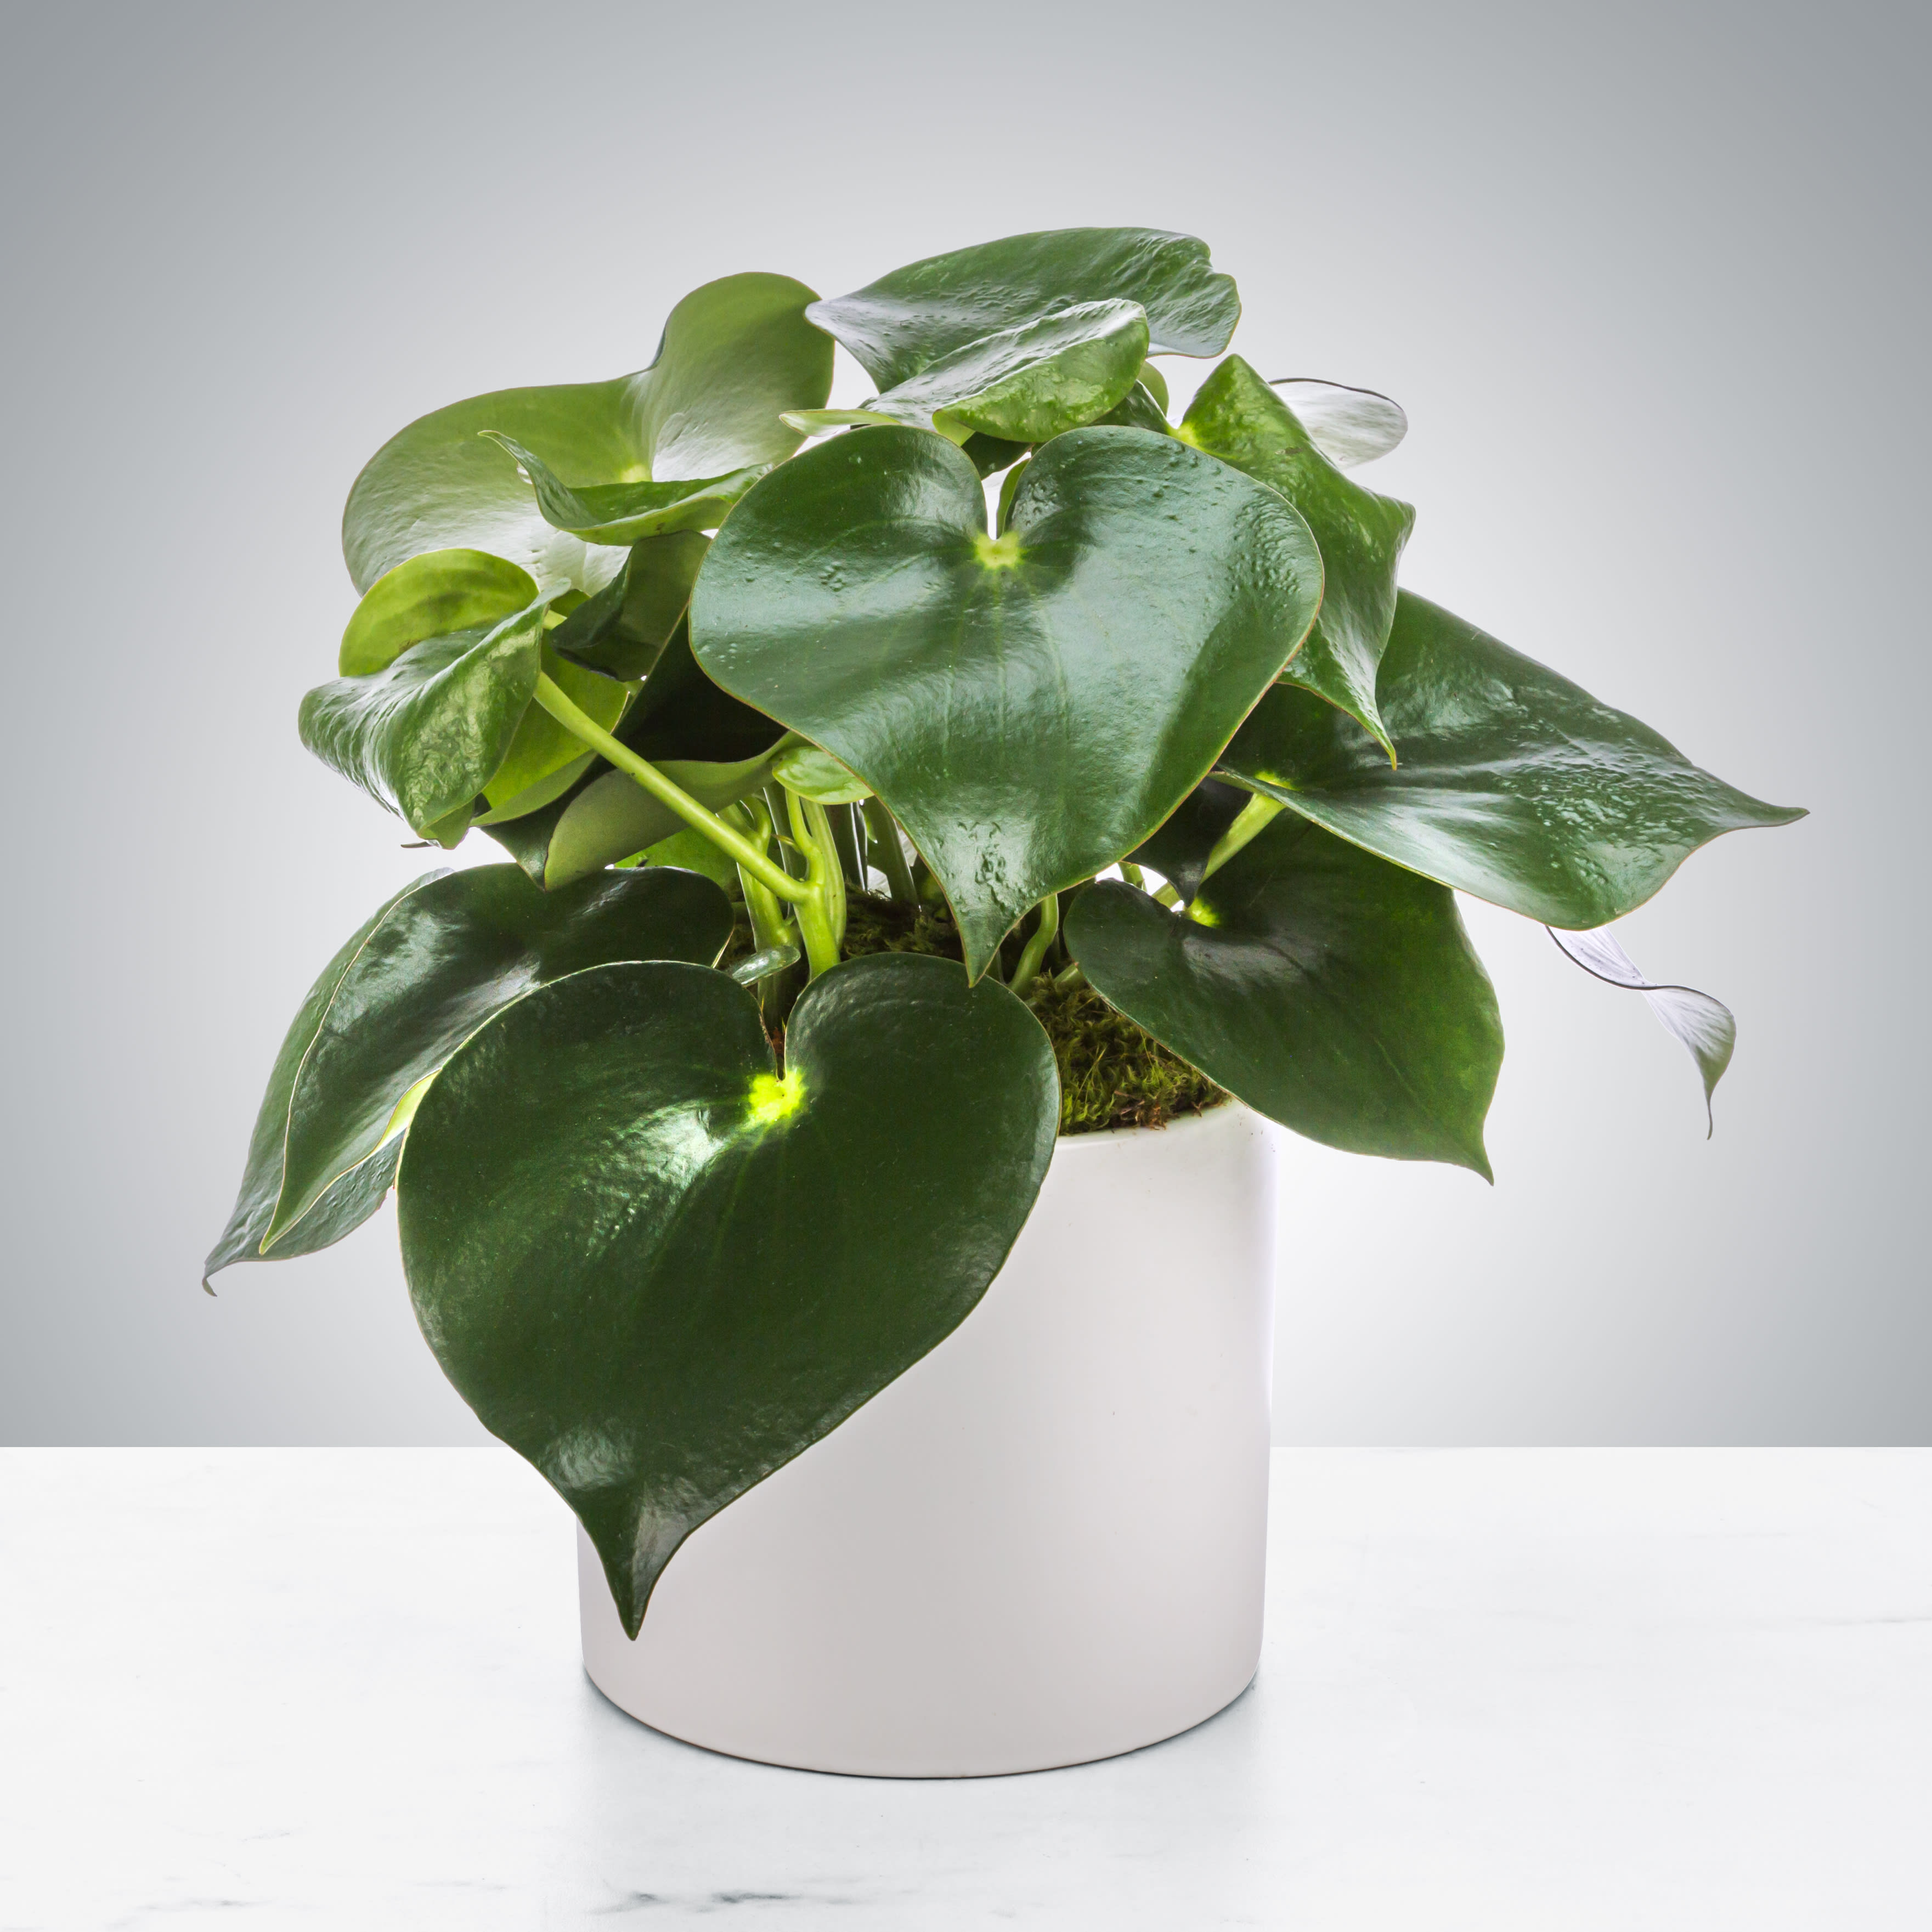 Raindrop Plant by BloomNation™ - The raindrop plant, also known as the Peperomia polybotrya, does well in indirect light. A cute addition to any table or shelf, the shiny leaves are enjoyed by many. Send it as a gift for somebody's desk or windowsill.